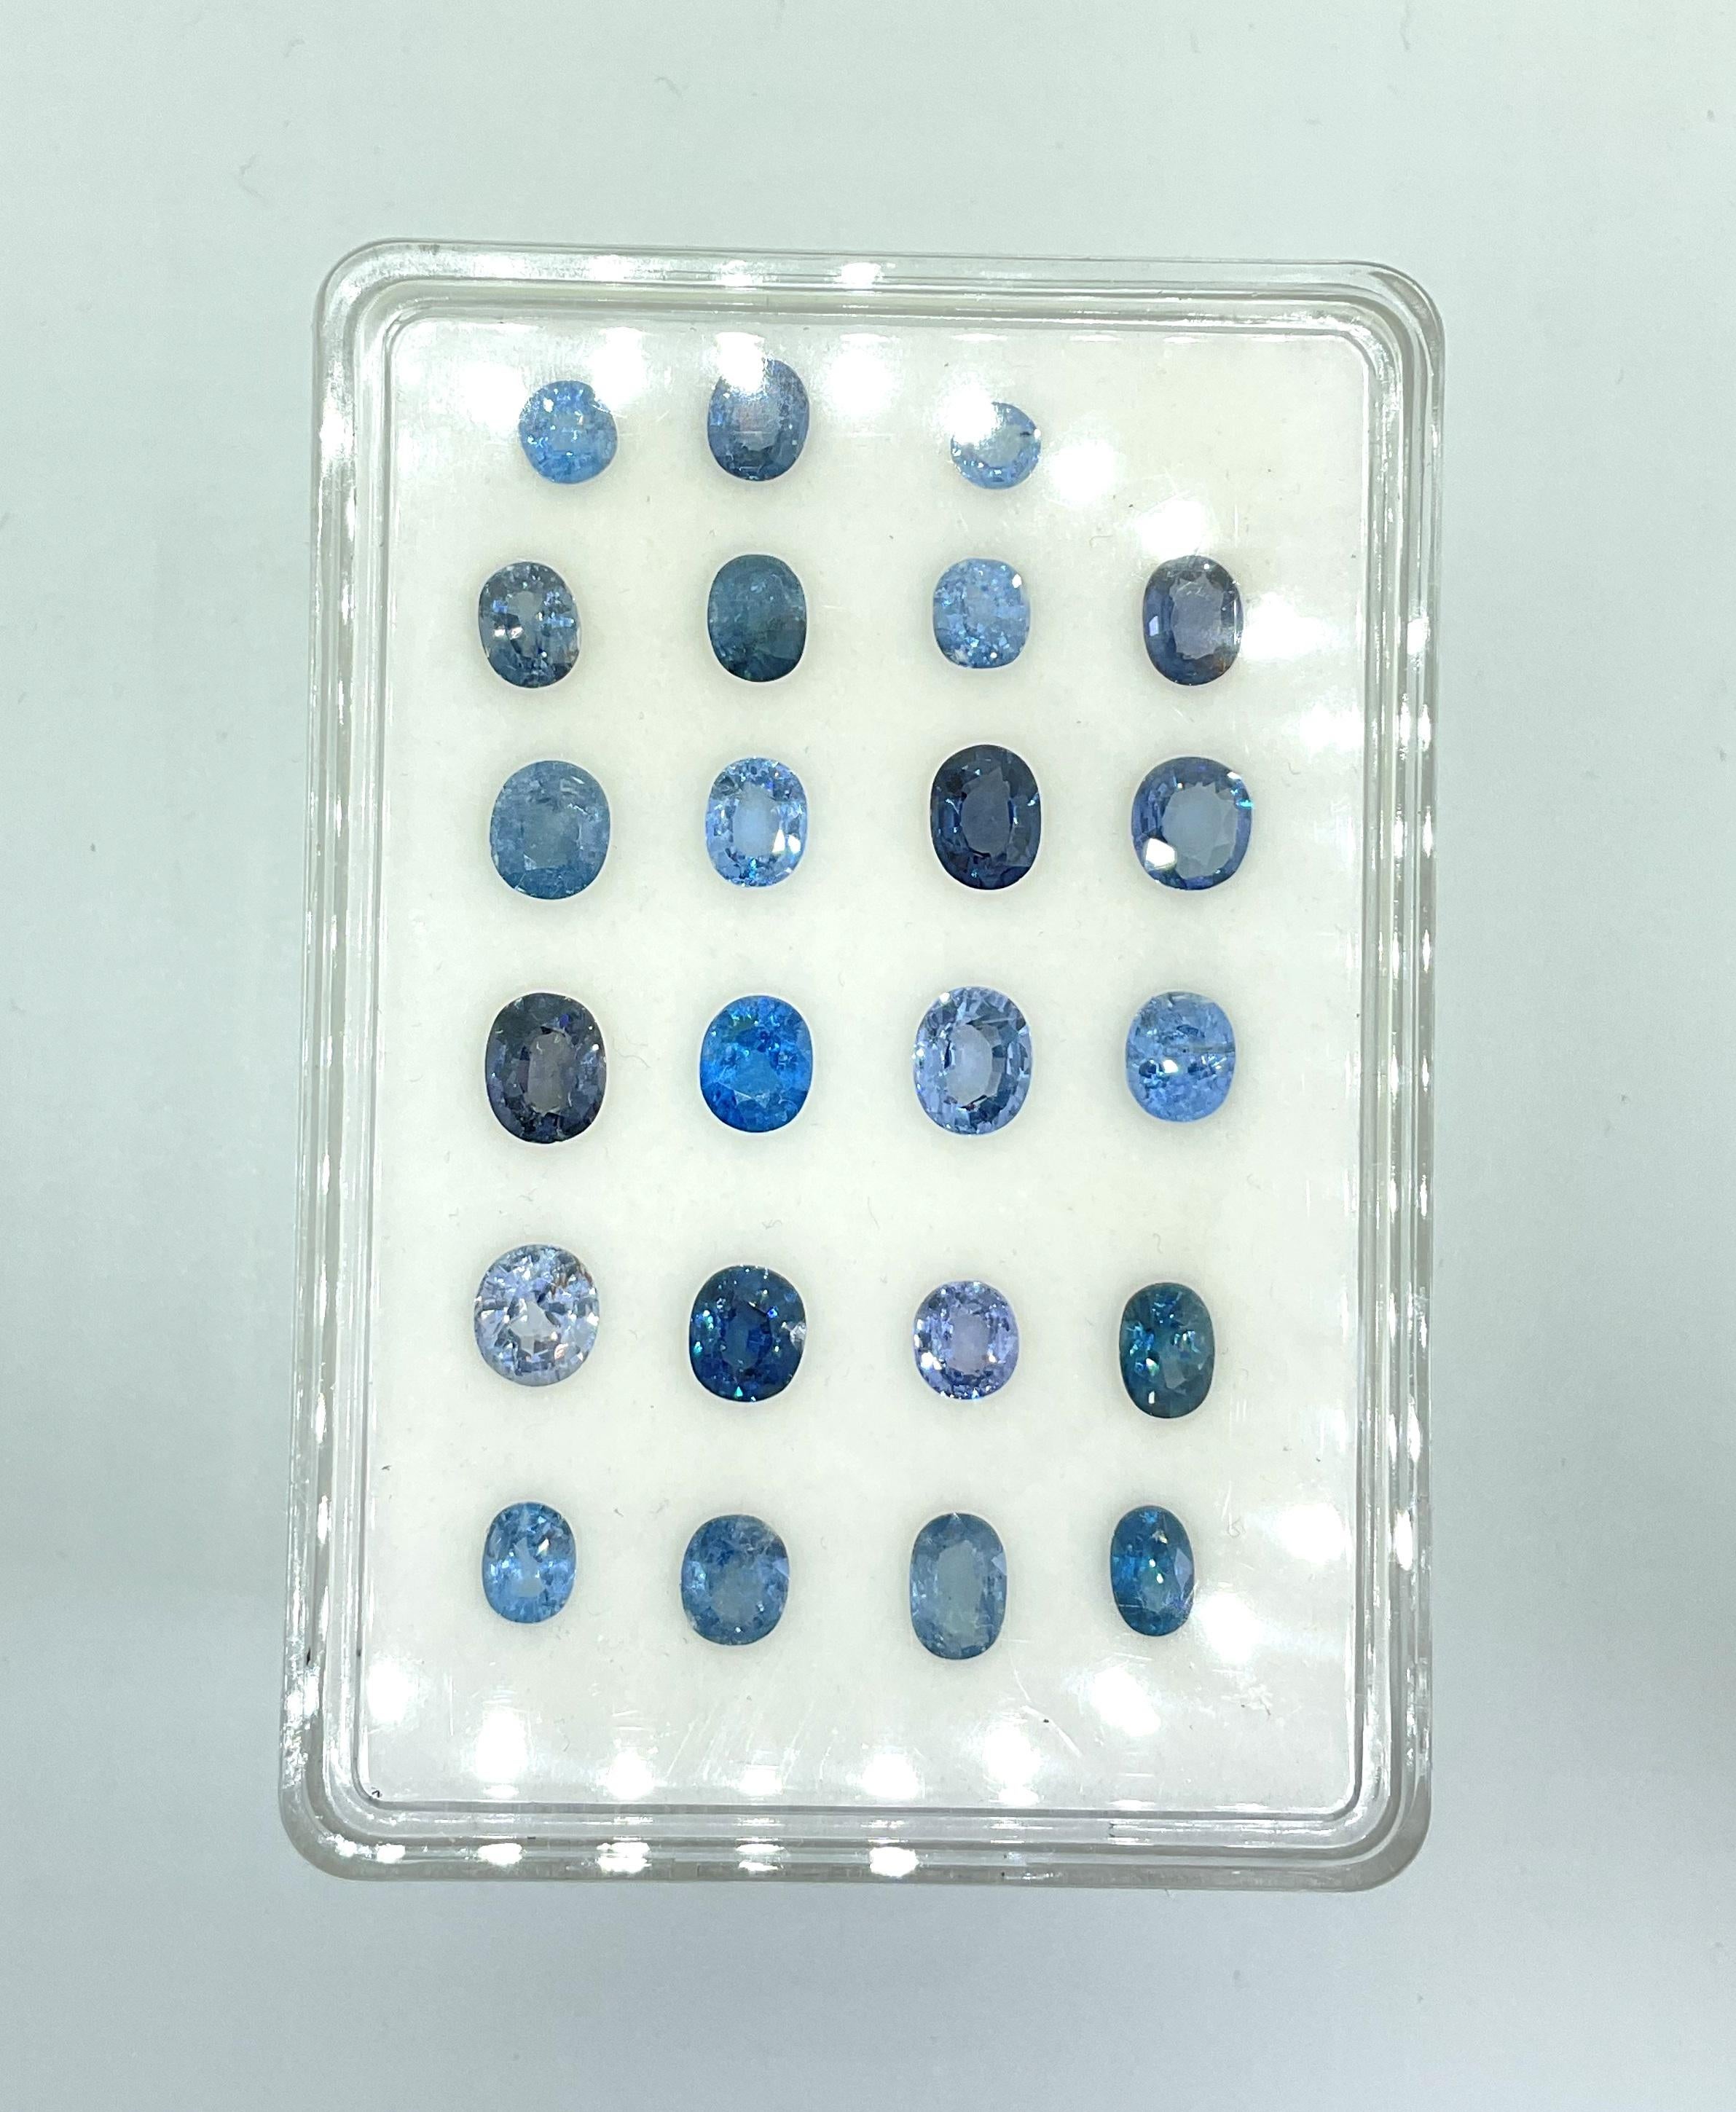 24.86 Carat Blue Spinel Tanzania Oval Faceted Natural Cut stone Fine Jewelry Gem

Weight - 24.86 Carats
Size - 4.5 To 8x6 mm
Shape - Oval
Quantity - 23 Piece